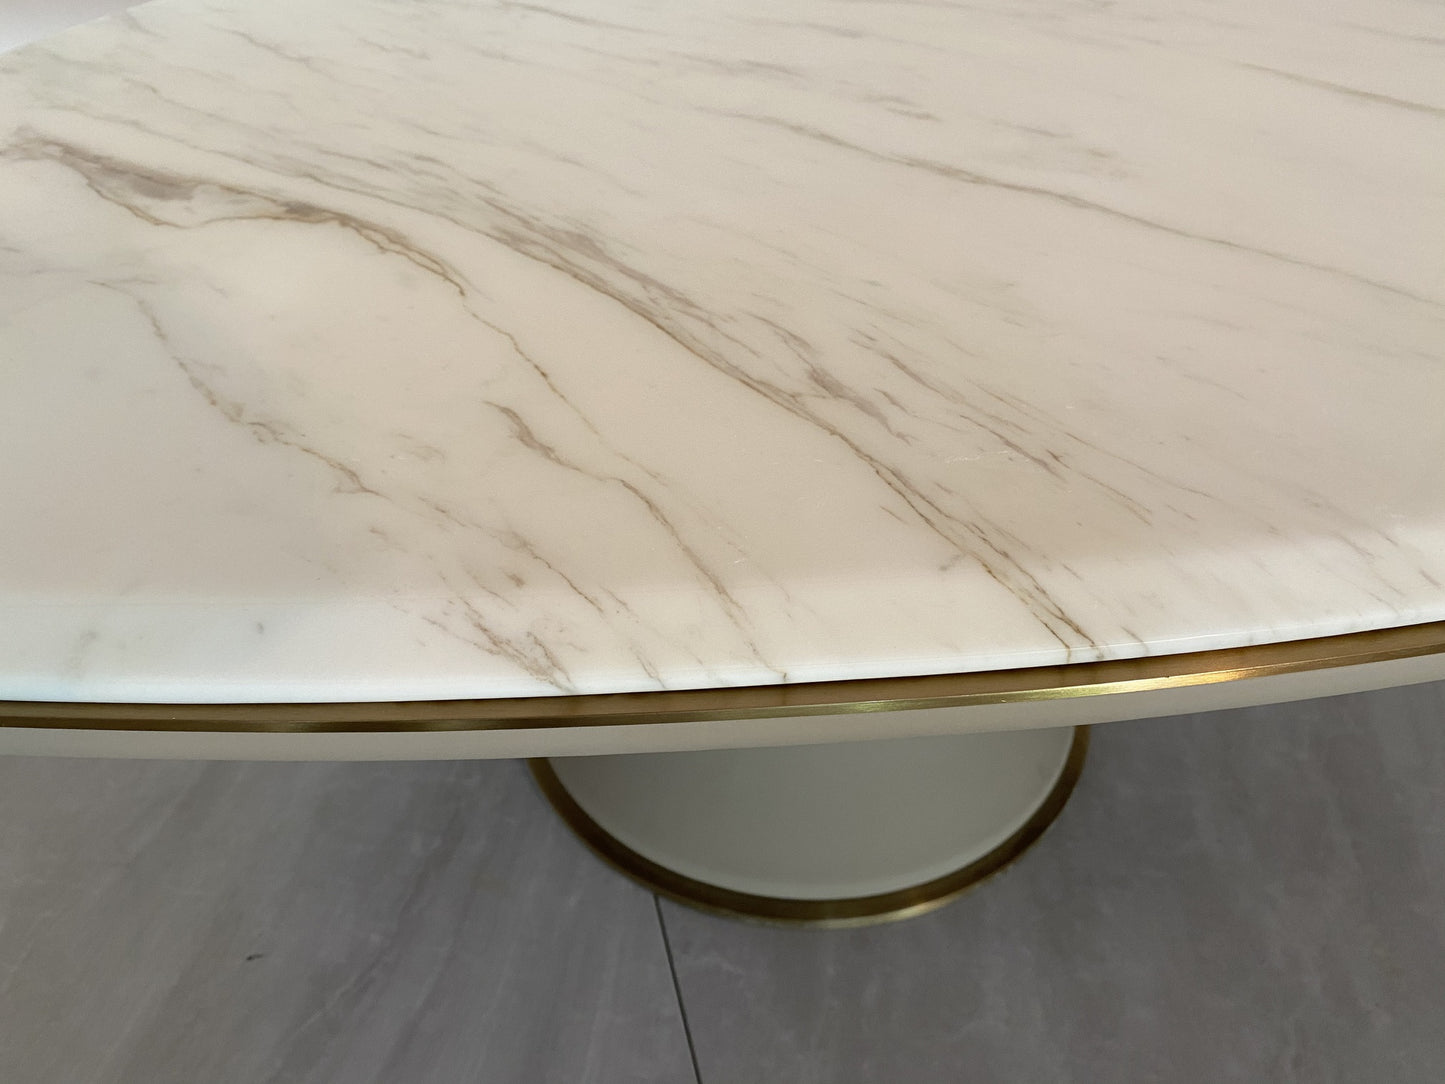 Longhi Gehry Coffee Table